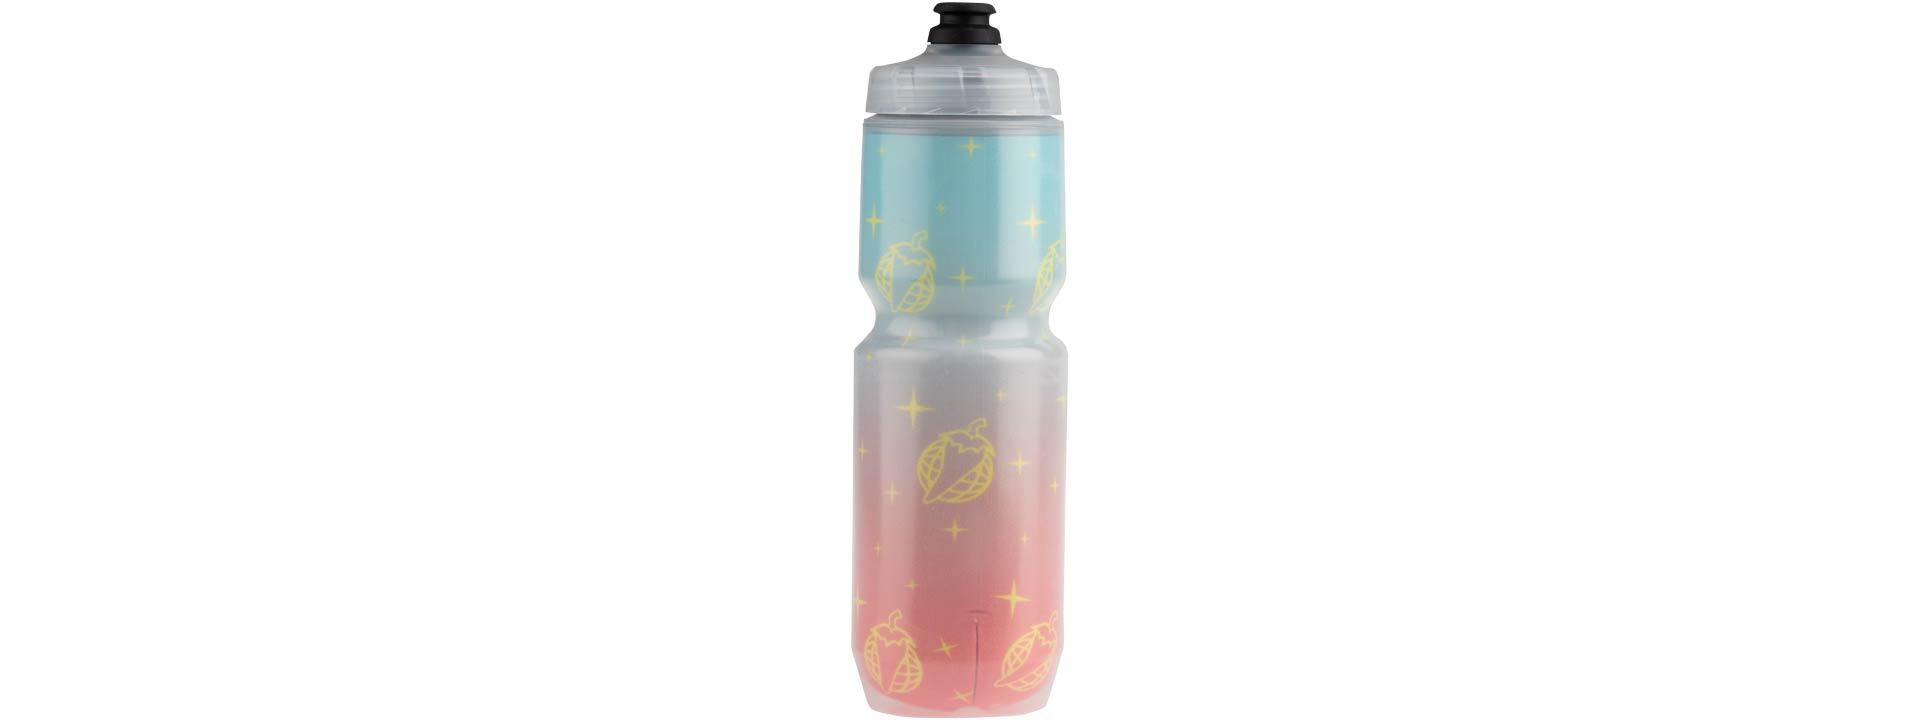 Salsa Cassidy Purist Insulated Water Bottle - Black, Yellow